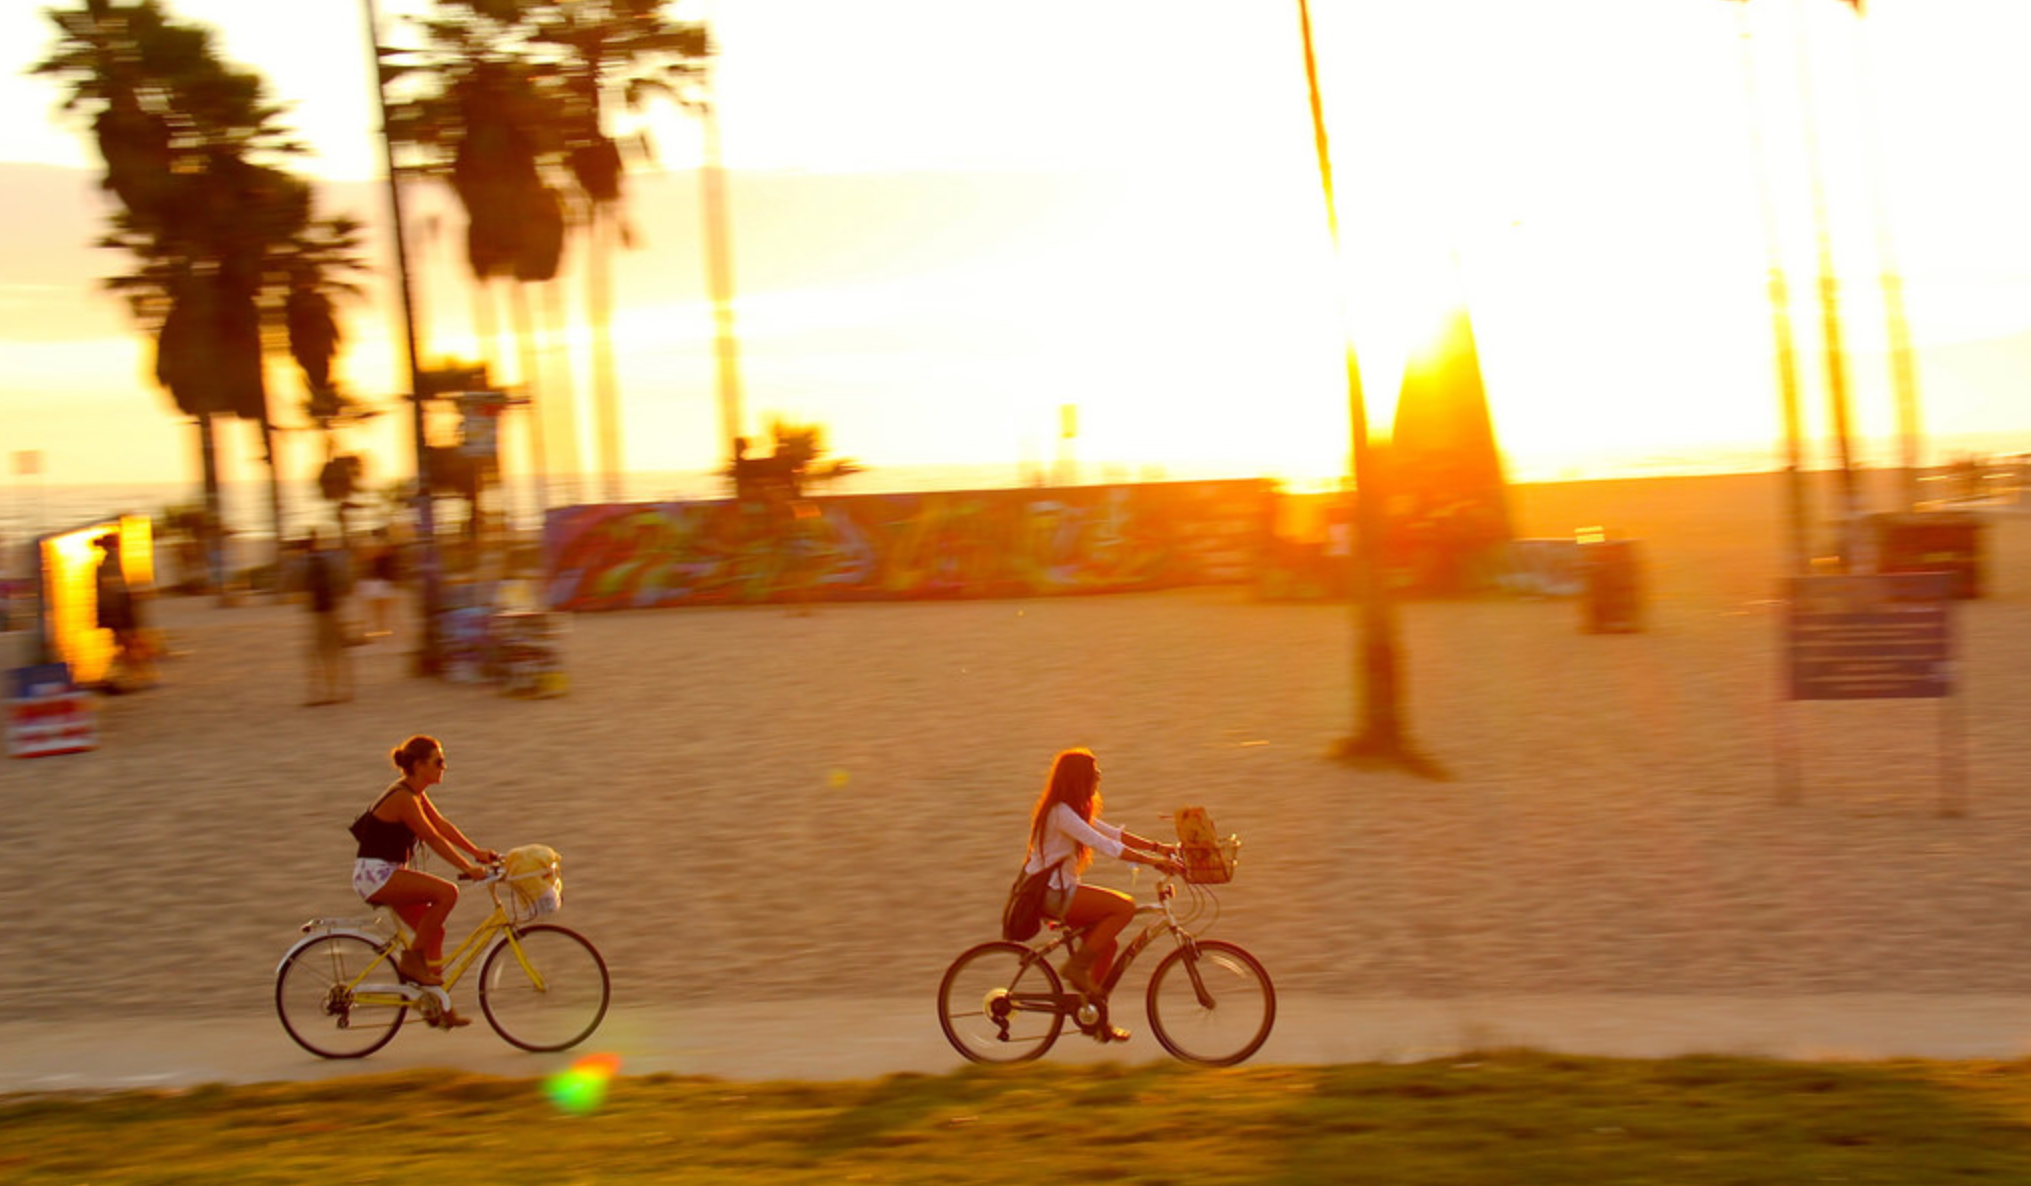 Venice Beach at sunset | Photo: Eric Demarcq, Discover Los Angeles Flickr Pool